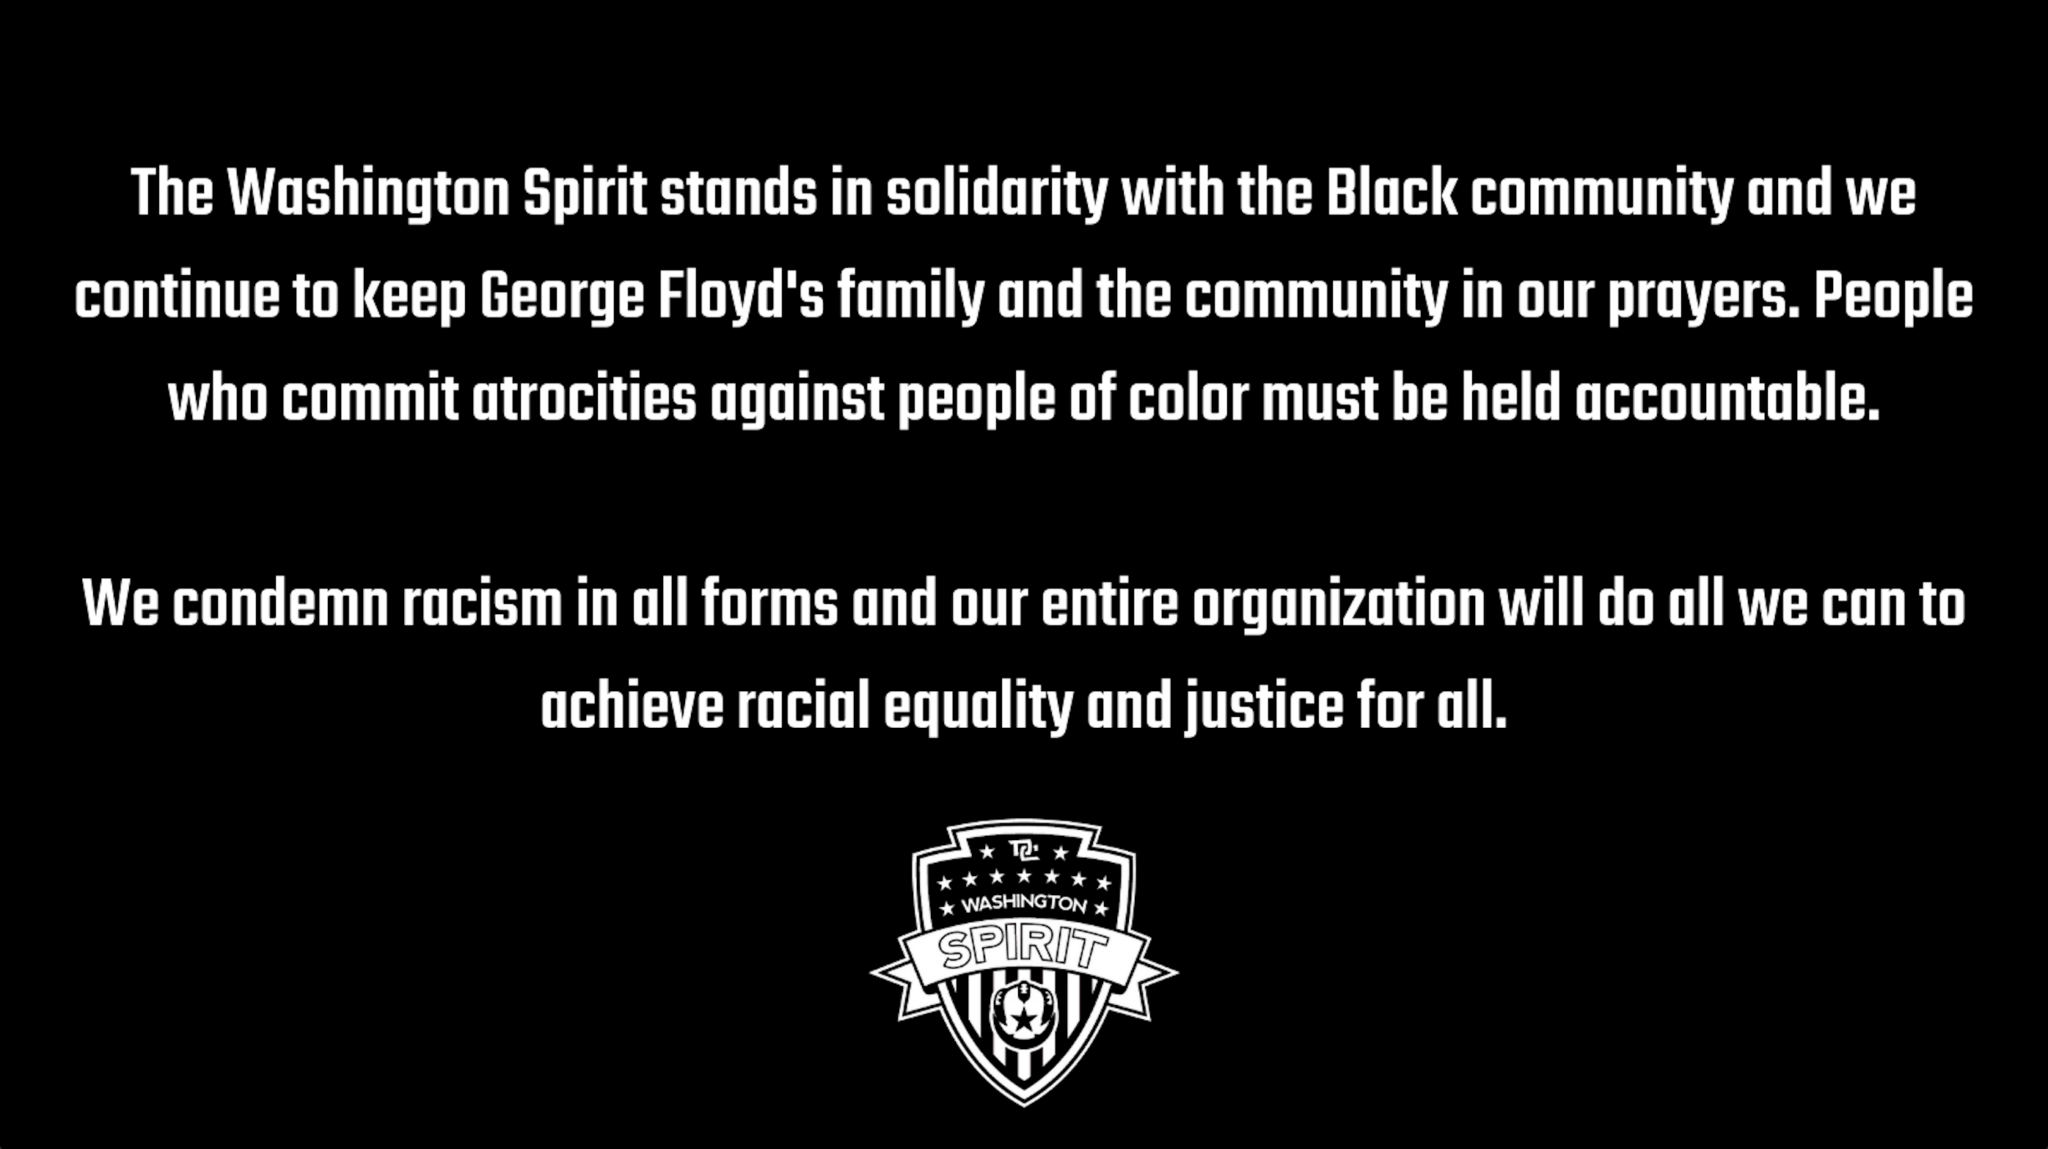 The Washington Spirit Stands in Solidarity With the Black Community Featured Image